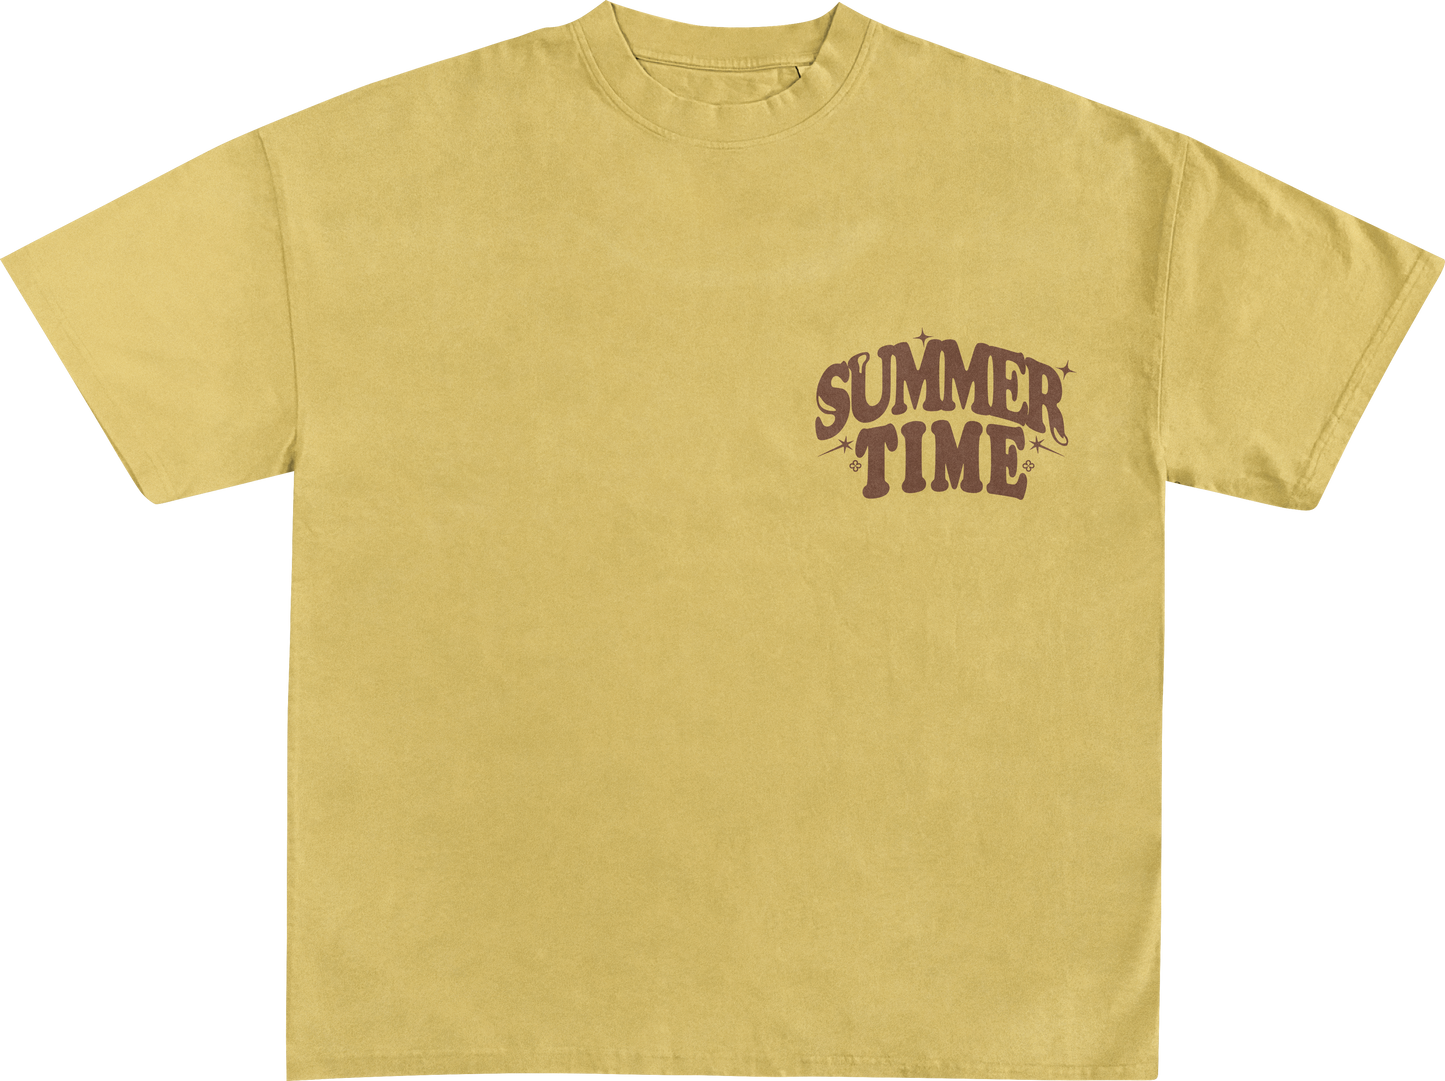 SUMMERTIME tee shirt inspired by the Ireland Boys  viral music video by the same name; SUMMERTIME. Features the SUMMERTIME logo on a Butter Yellow high quality T-shirt